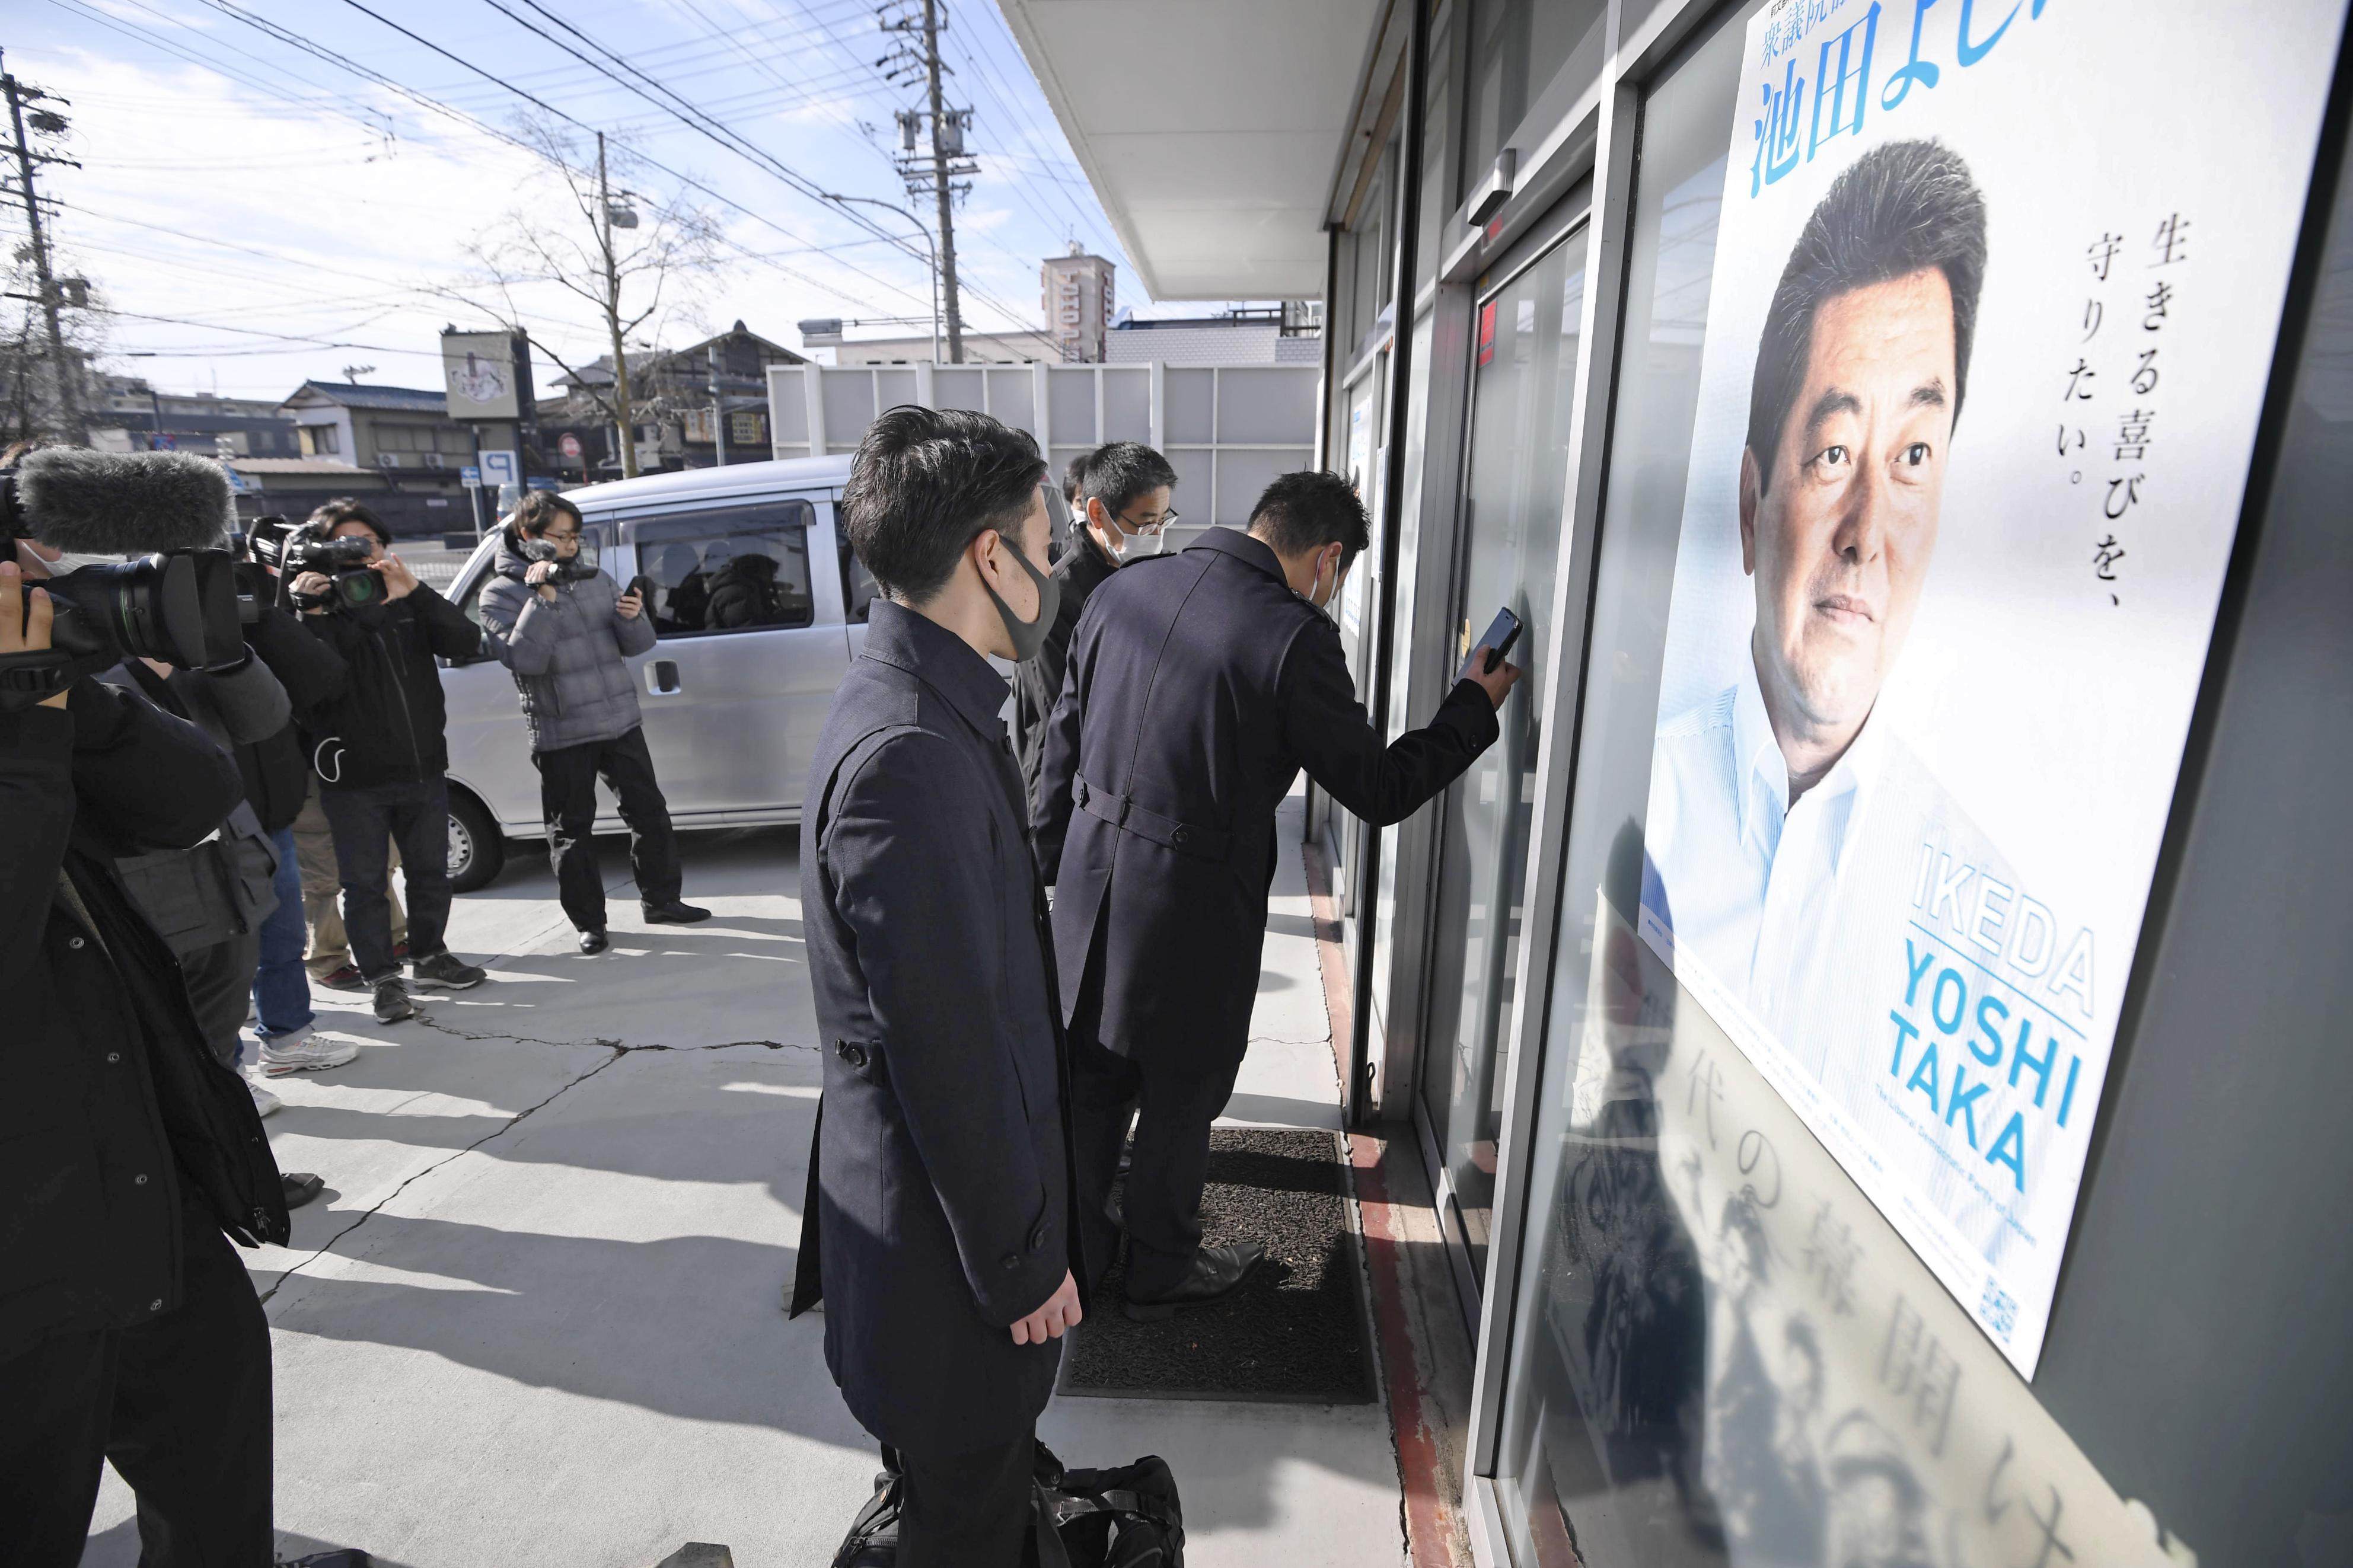 Japanese prosecutors prepare to search the office of House of Representatives lawmaker Yoshitaka Ikeda from the LDP’s largest faction in Nagoya on December 27 amid a fundraising scandal. Photo: Kyodo